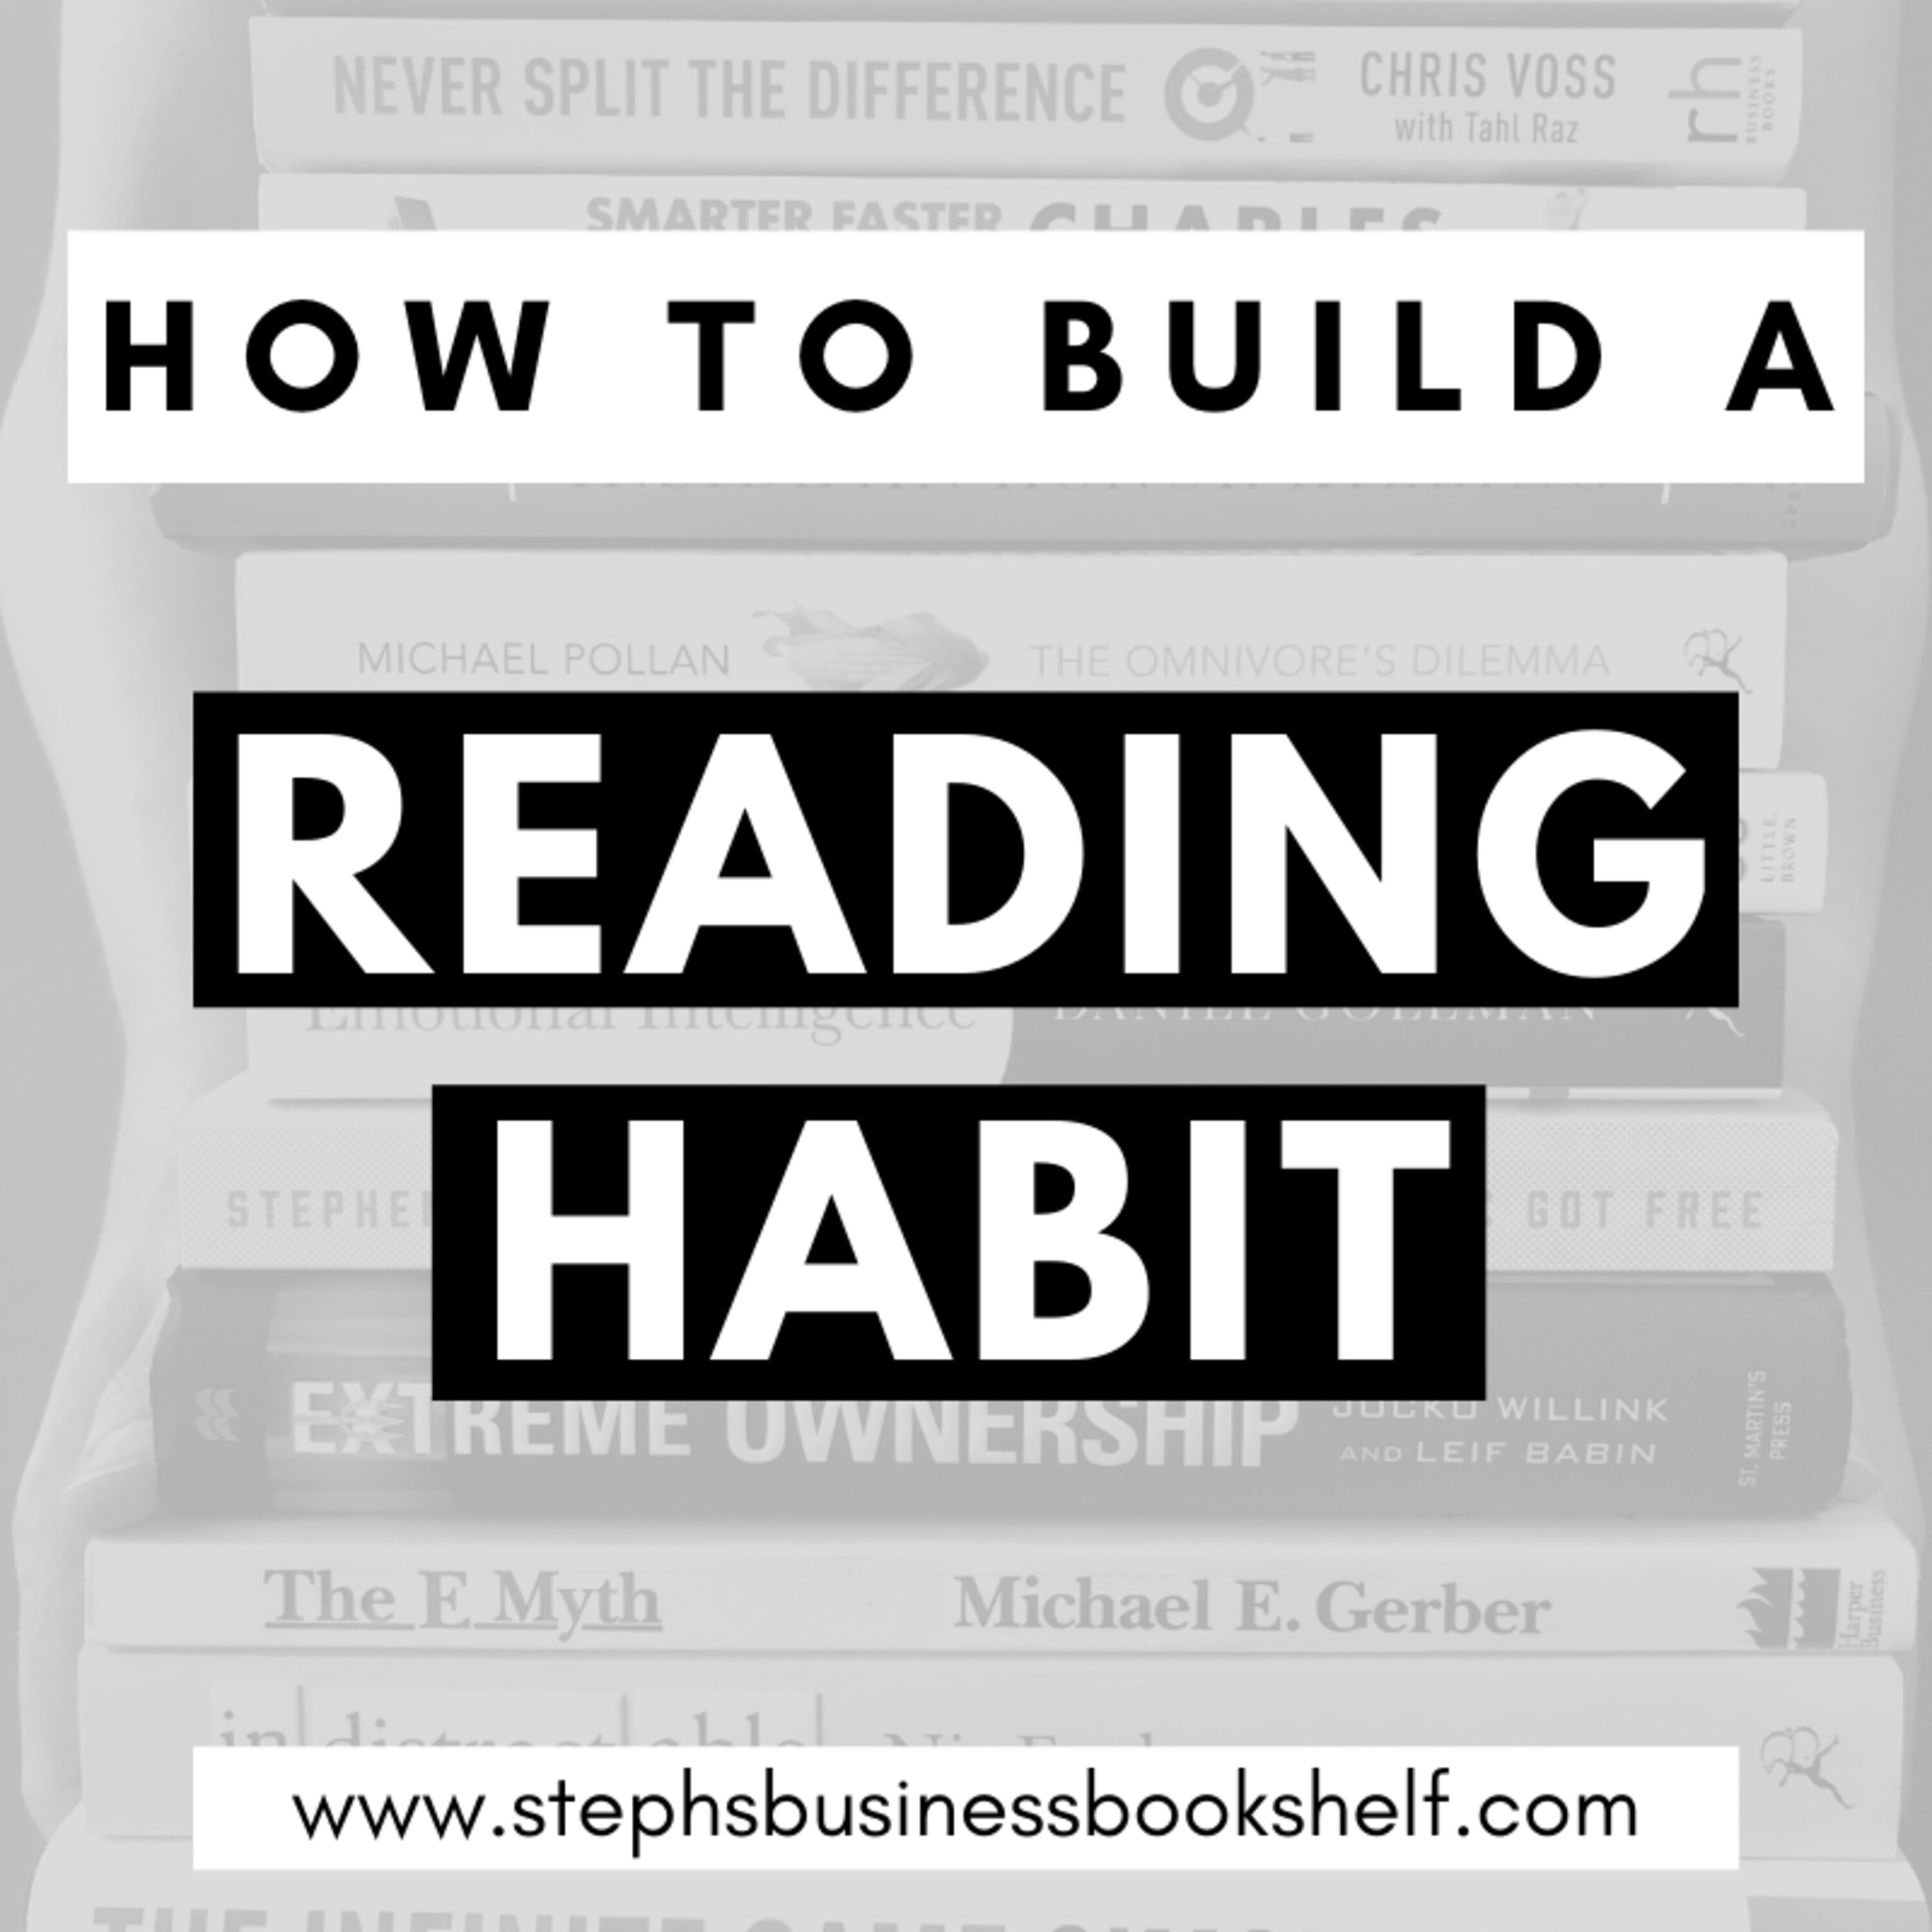 How to Build a Reading Habit: Five tips to help you read more books in 2020